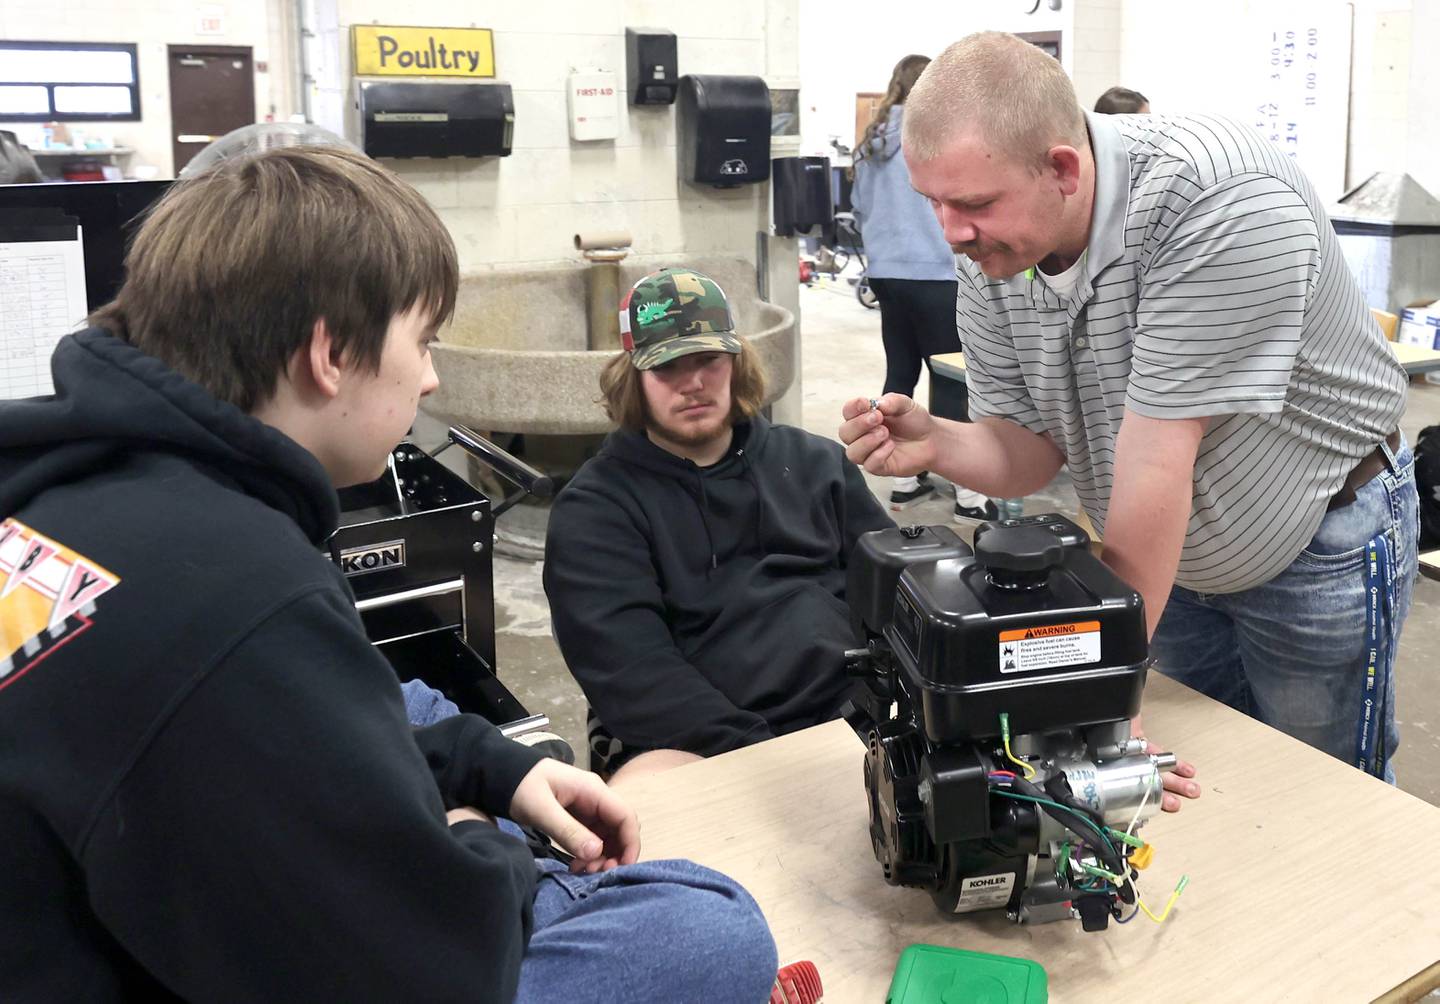 Sycamore High School agriculture teacher Christian Thurwanger looks at a piece of hardware as he helps sophomores Shawn Reser (left) and Ben Lancaster during a small engines lab Monday, March 14, 2022, at the school. The lab is part of the agriculture program in the Career and Technical Education department at Sycamore High School.